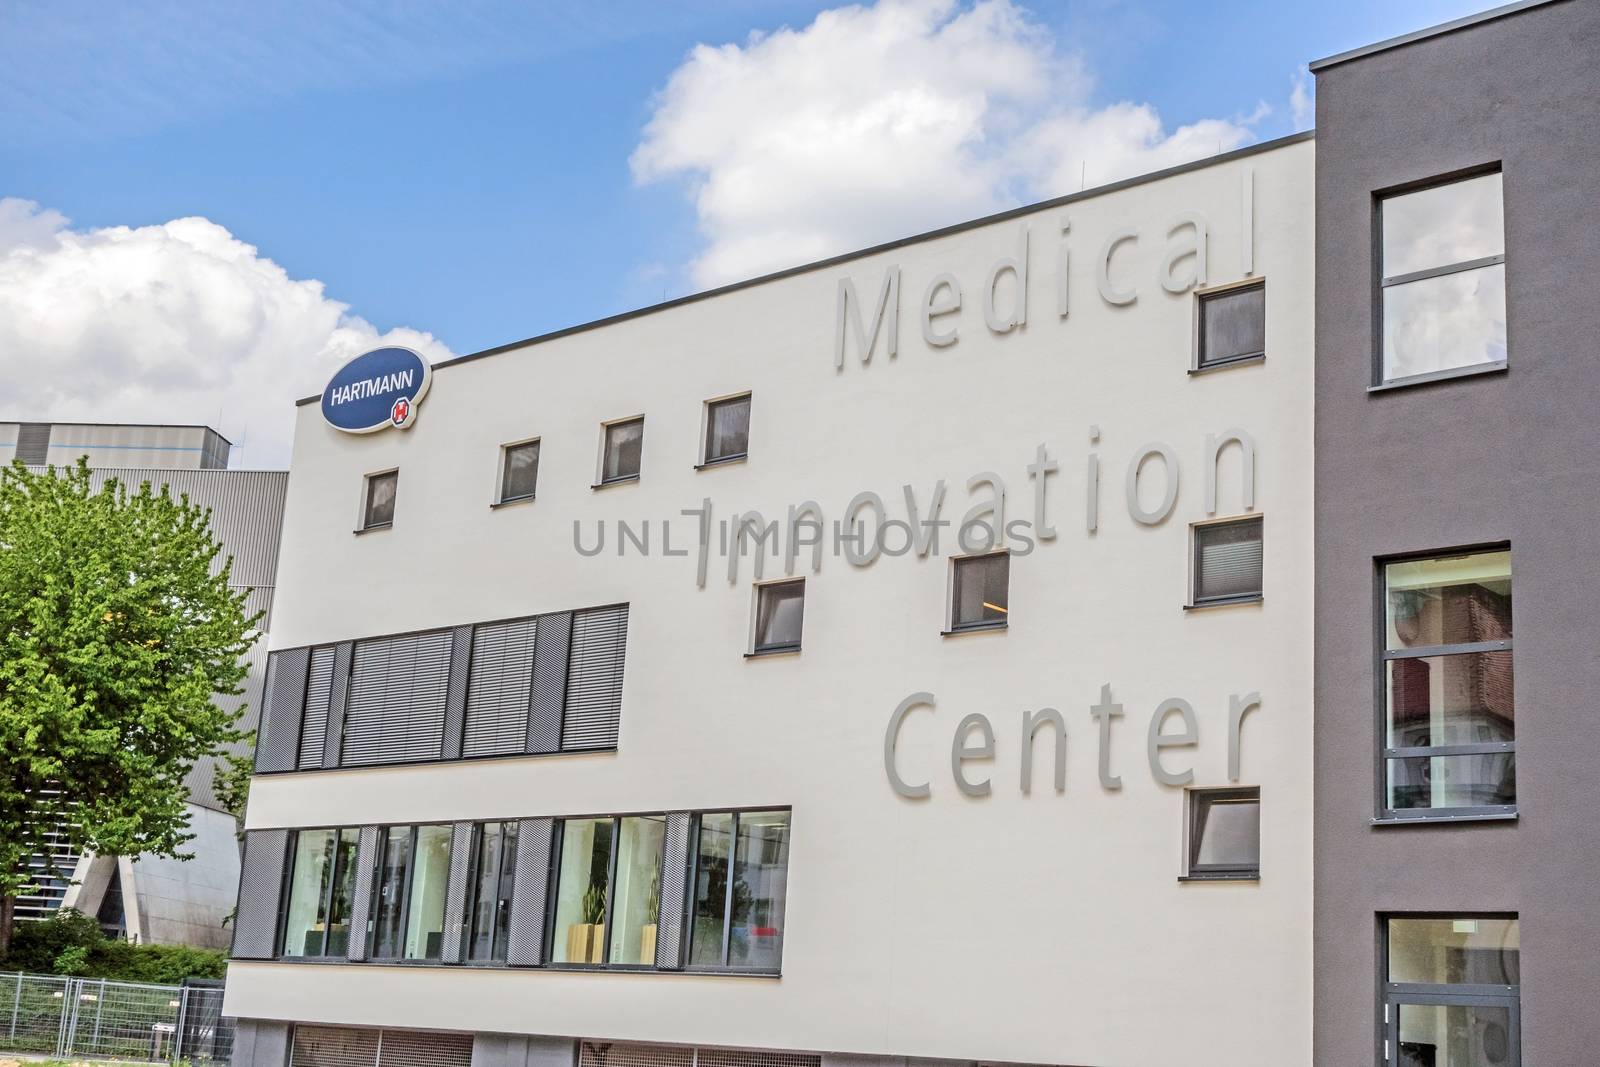 Heidenheim, Germany - May 26, 2016: Medical Innovation Centerof Hartmann AG, a german international operative company producing medical and care products.